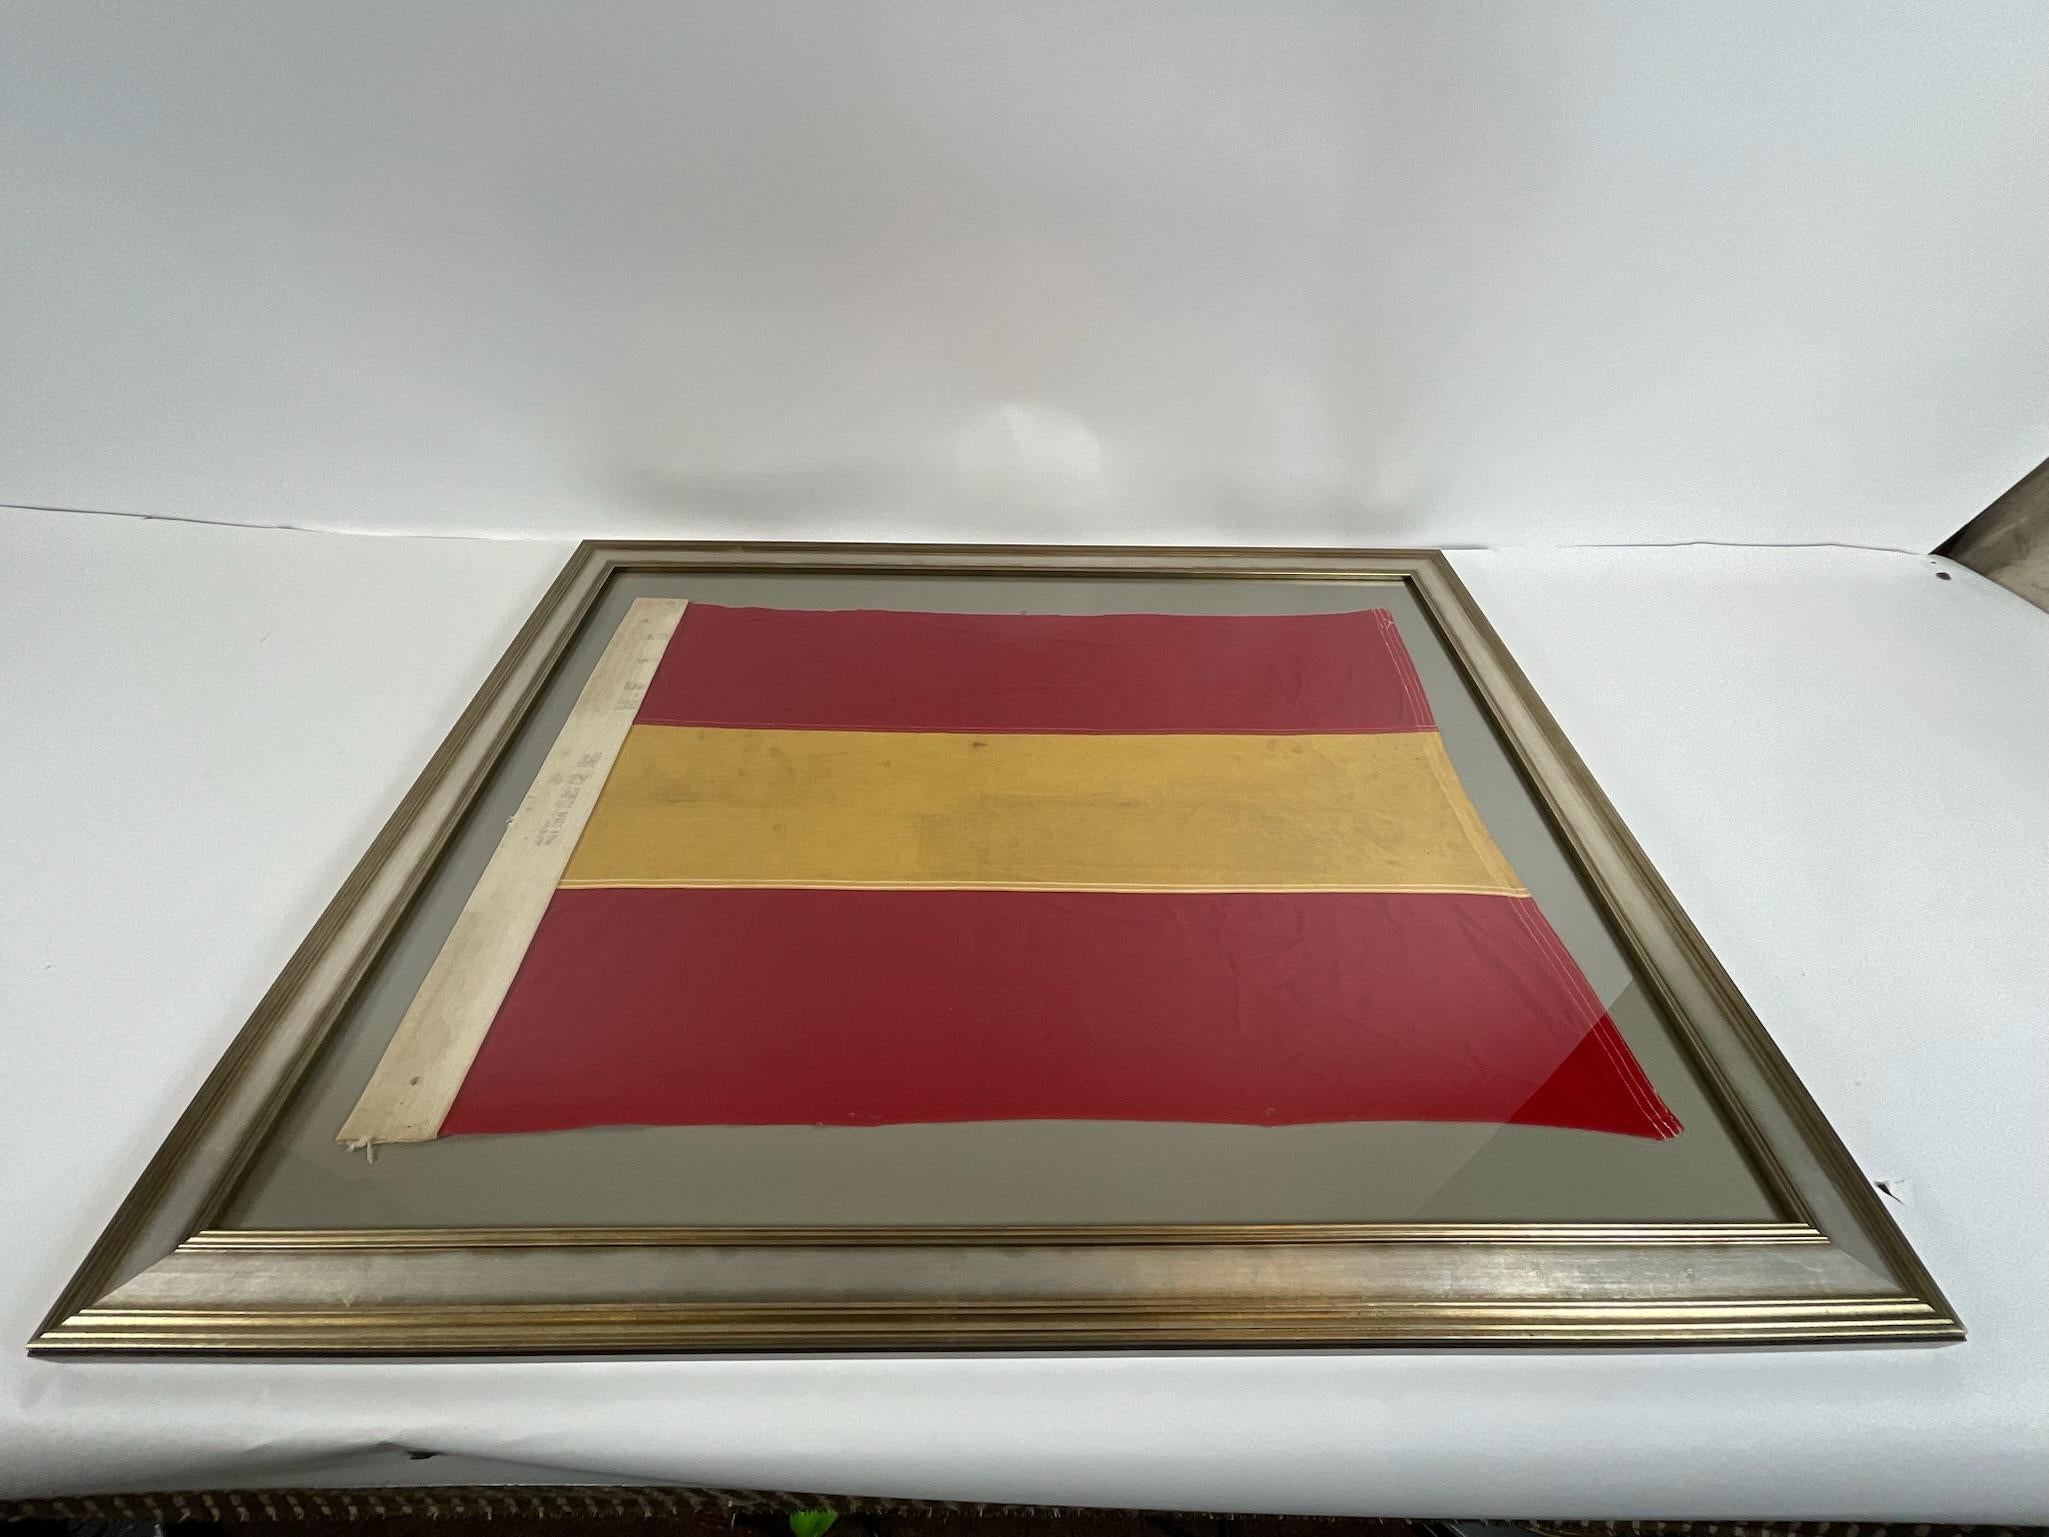 Framed Nautical Flag by Dettra In Good Condition For Sale In Norwell, MA